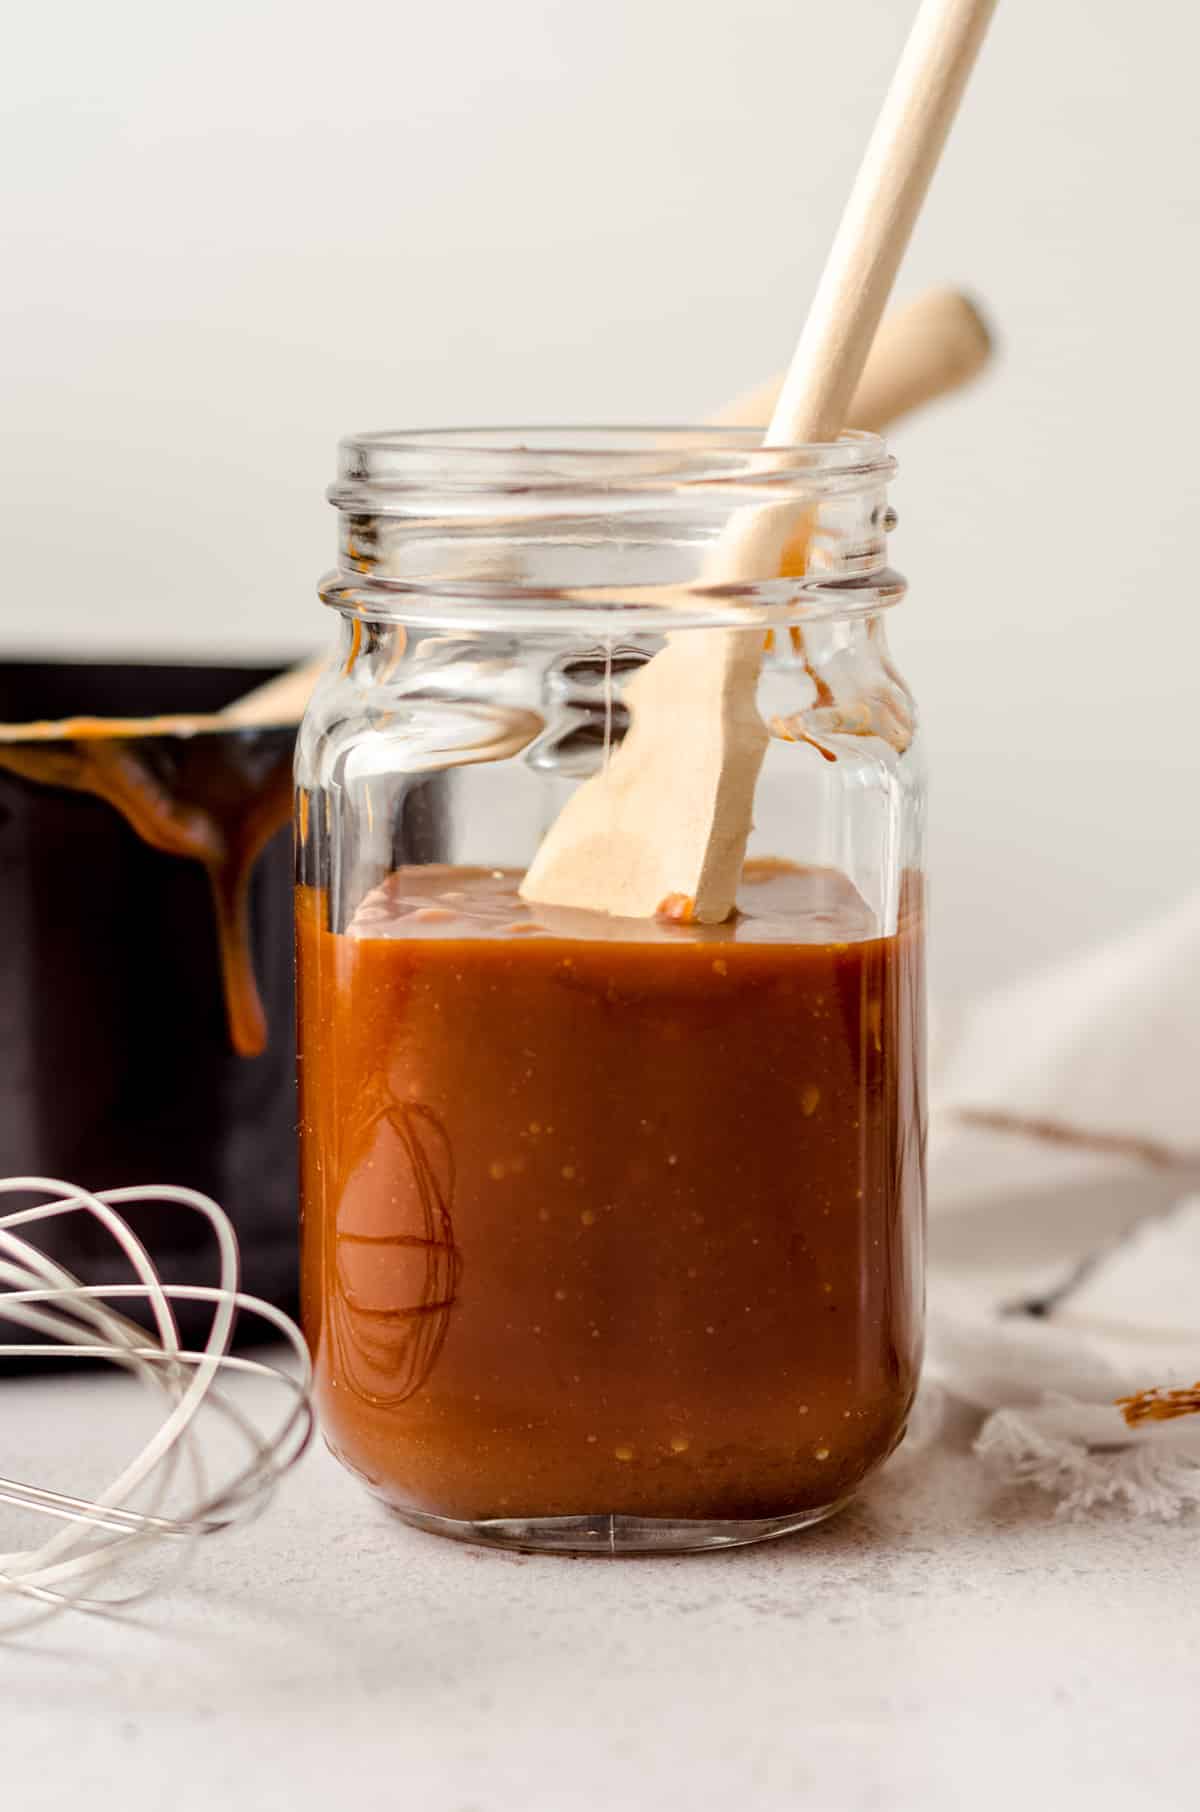 jar of salted caramel sauce with a wooden spoon sitting in it